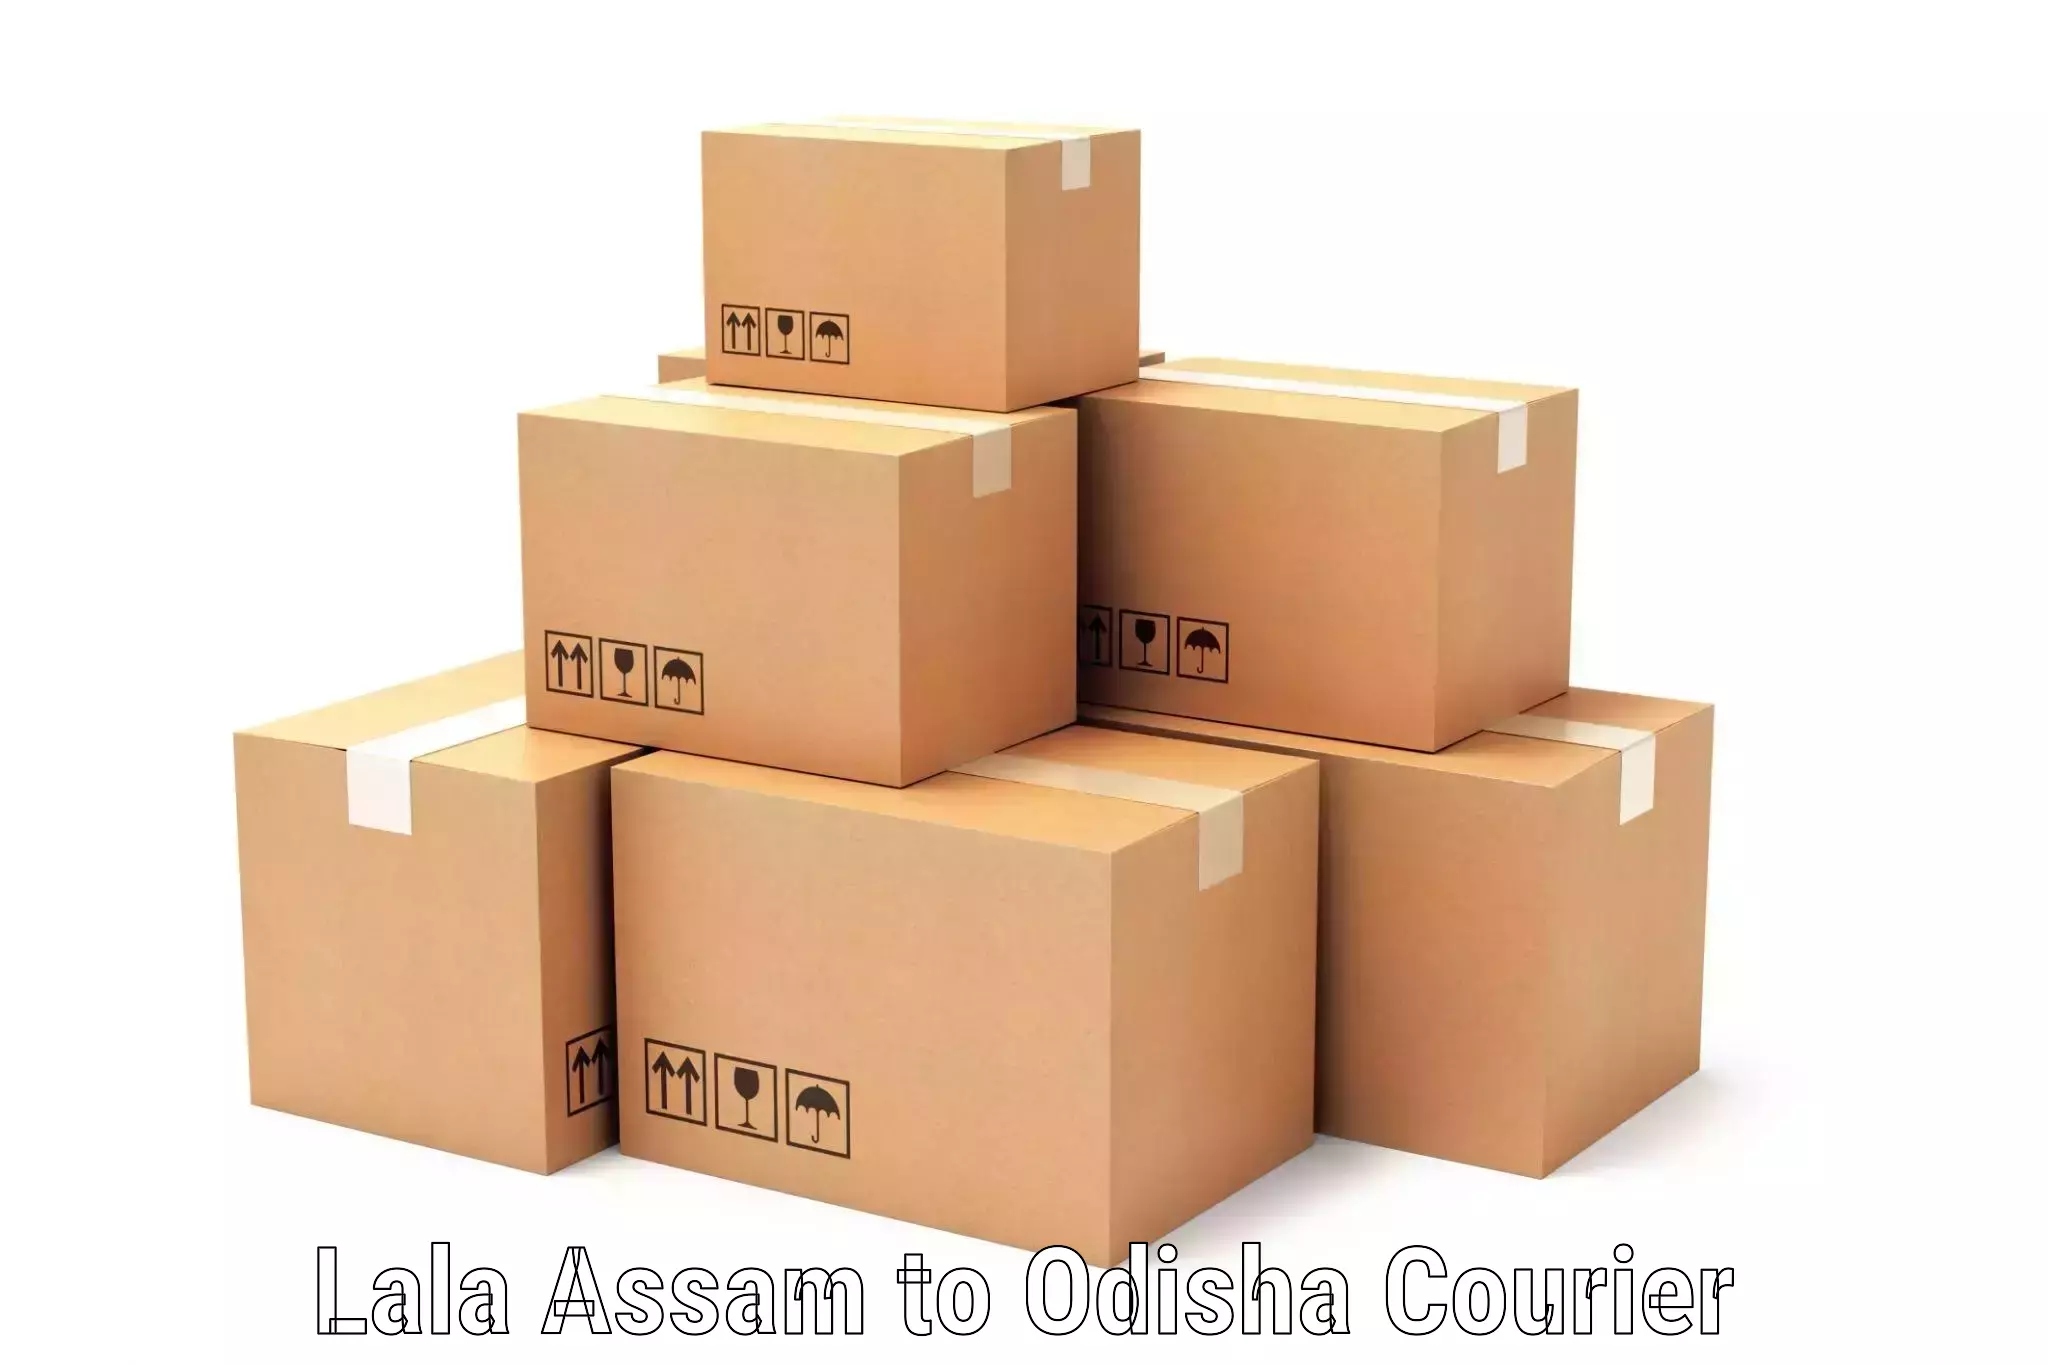 Global shipping networks Lala Assam to Galleri